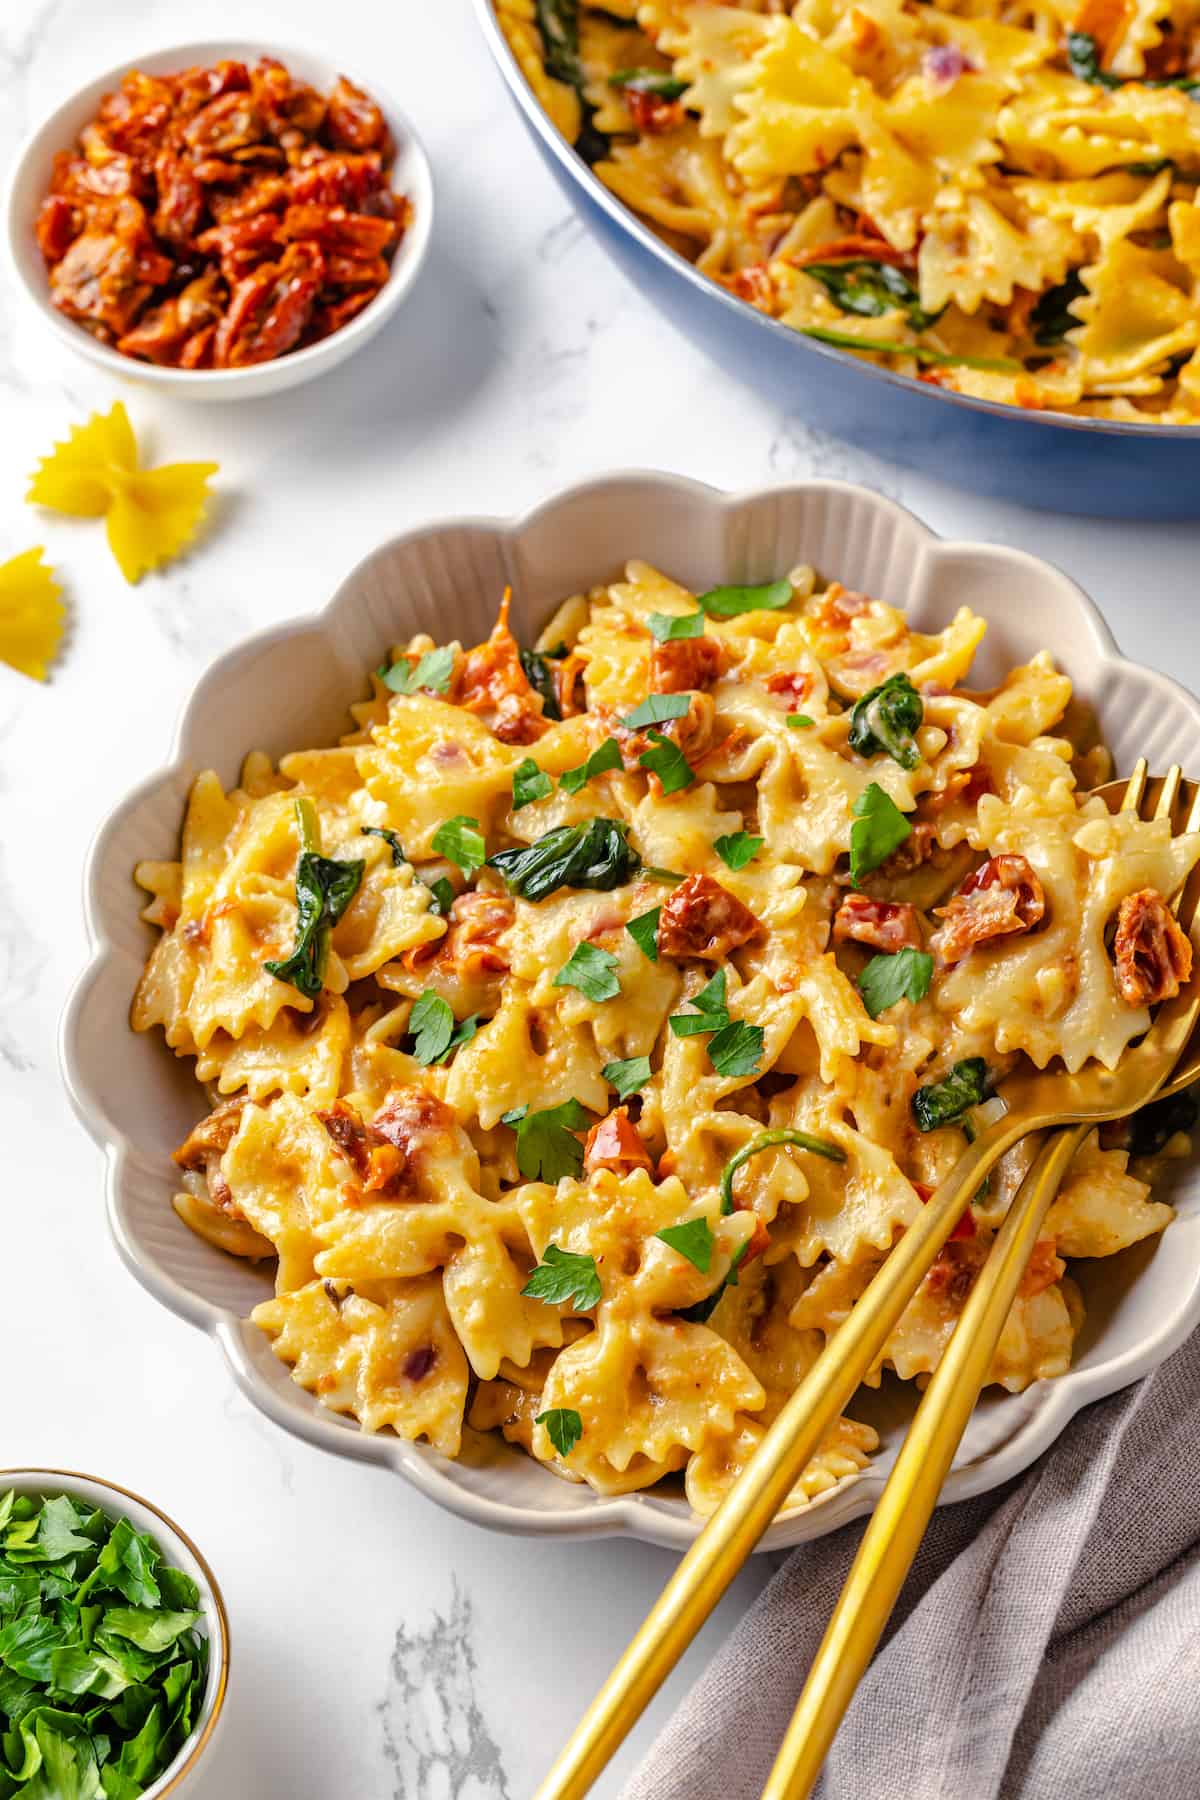 Sun-dried tomato pasta with spinach in bowl